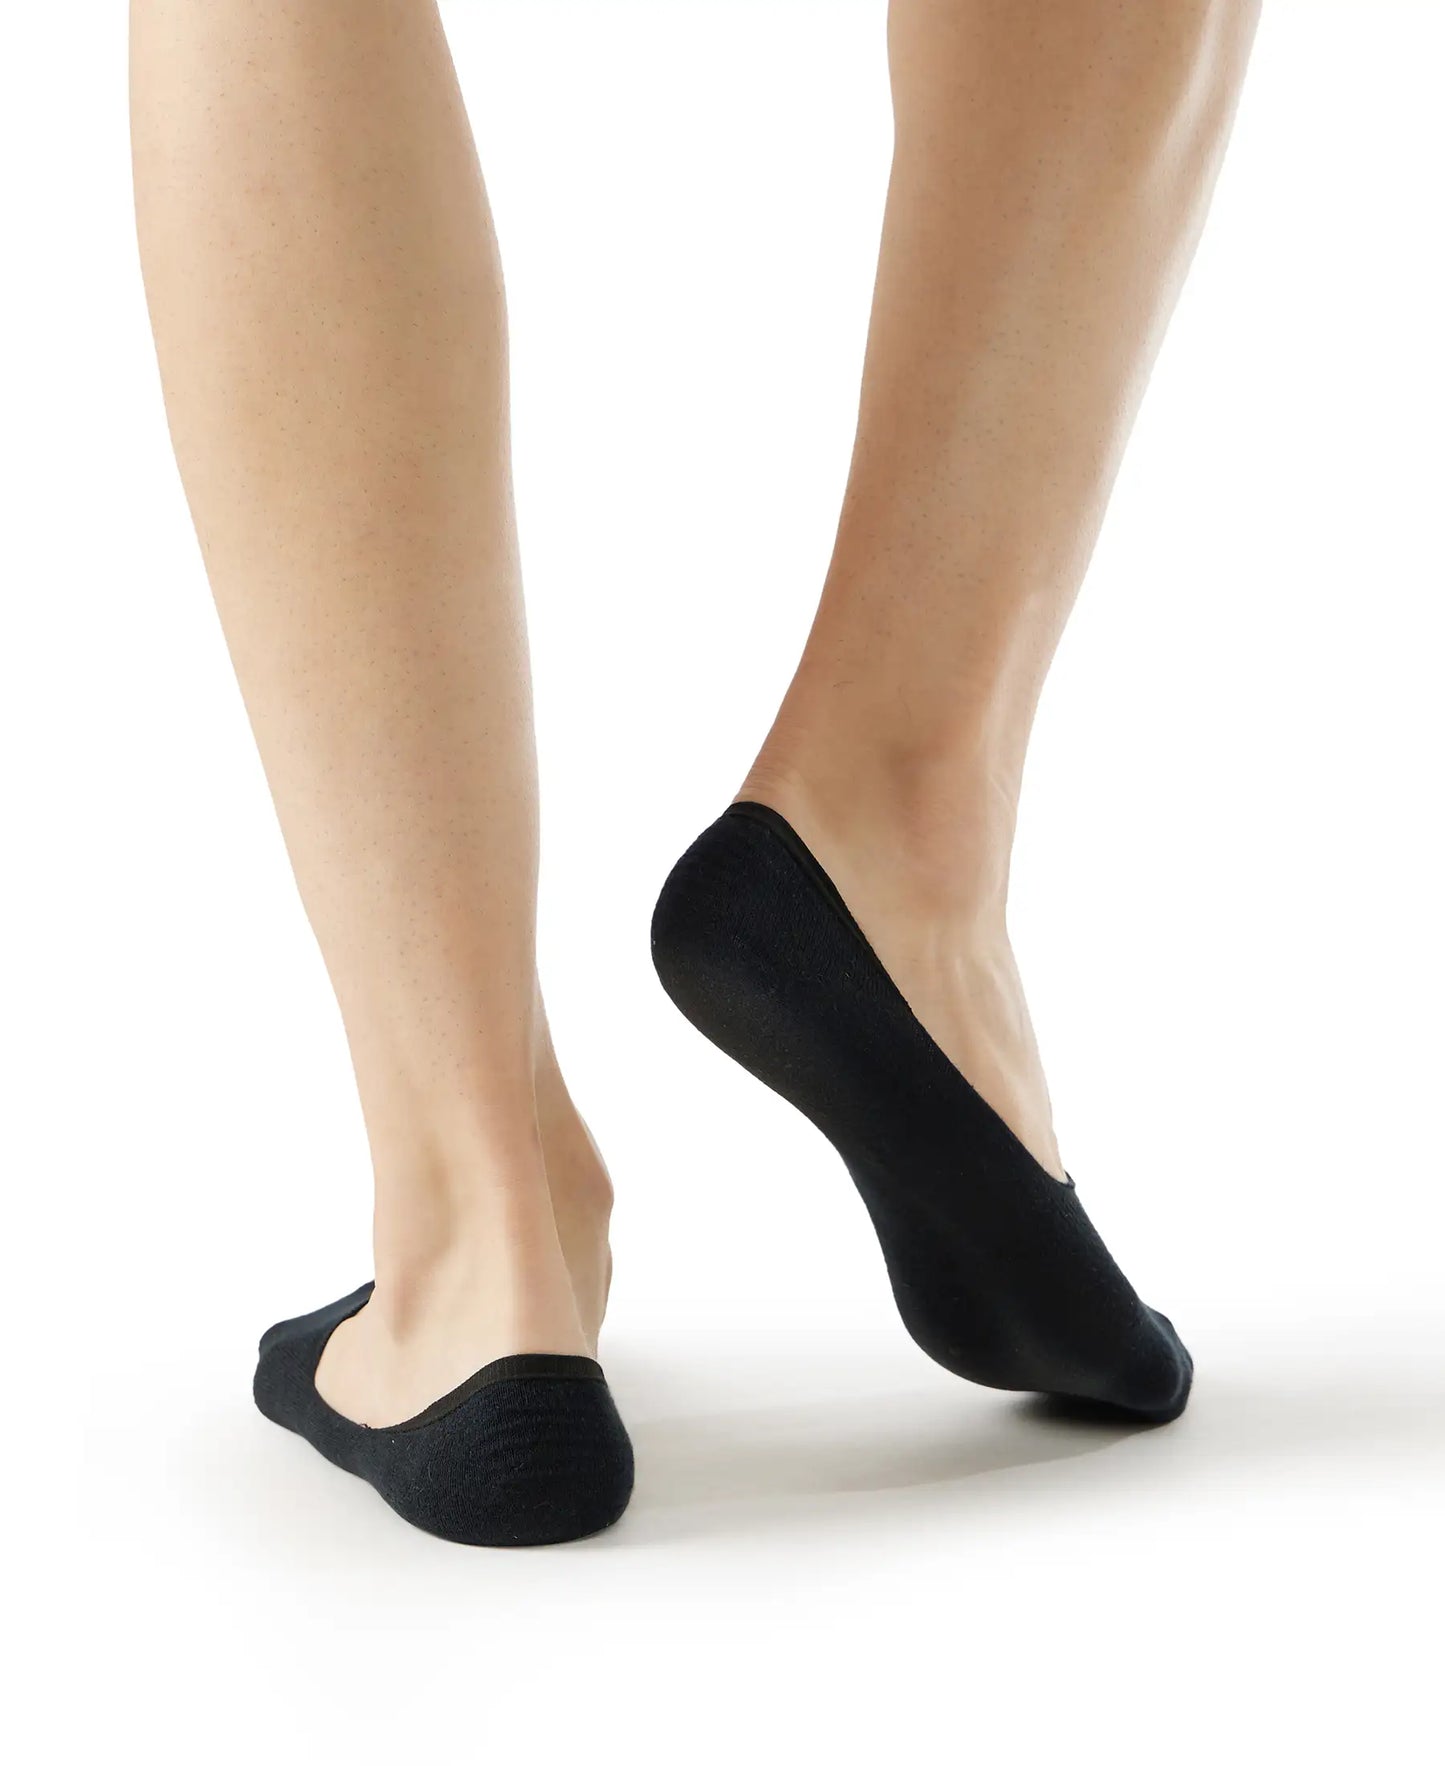 Compact Cotton Elastane Stretch No Show Socks With StayFresh Treatment - Black (Pack of 2)